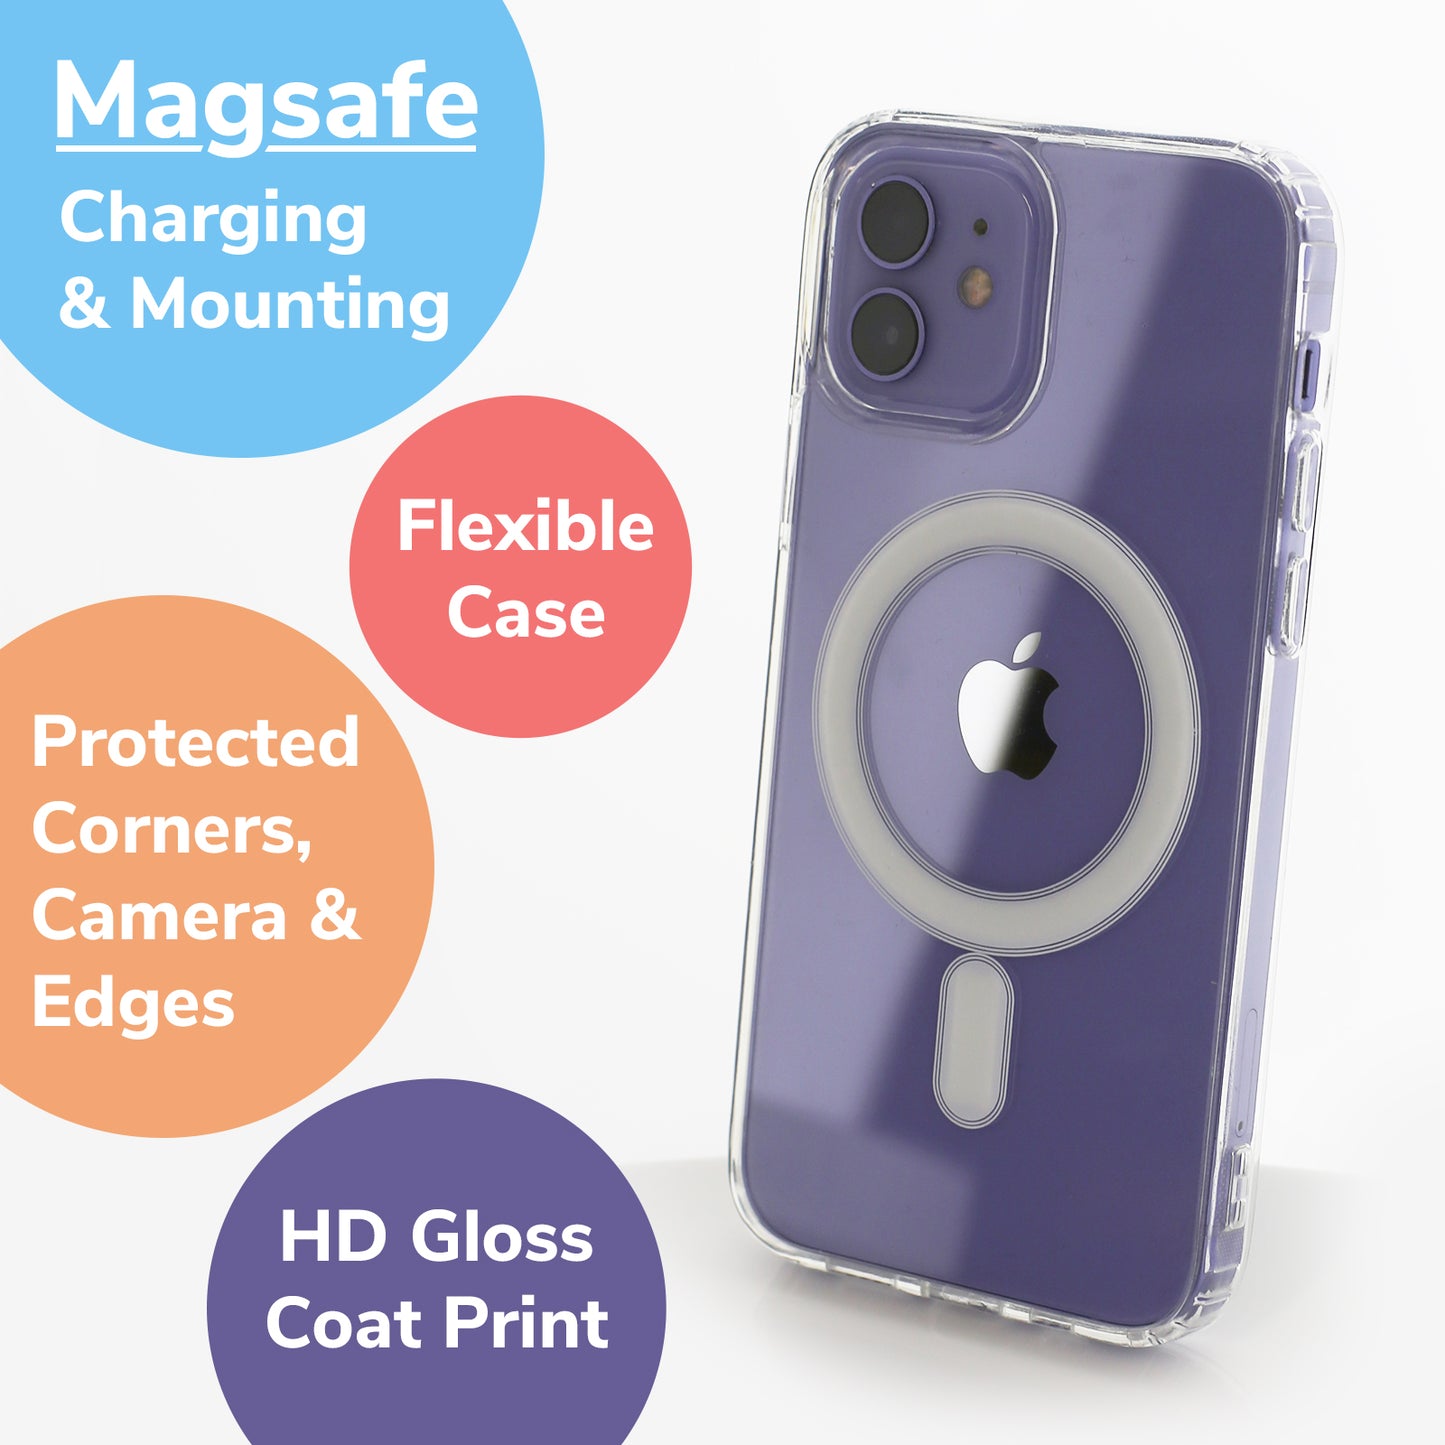 Personalised Magsafe iPhone Case - Violet Heart Monogram and Name